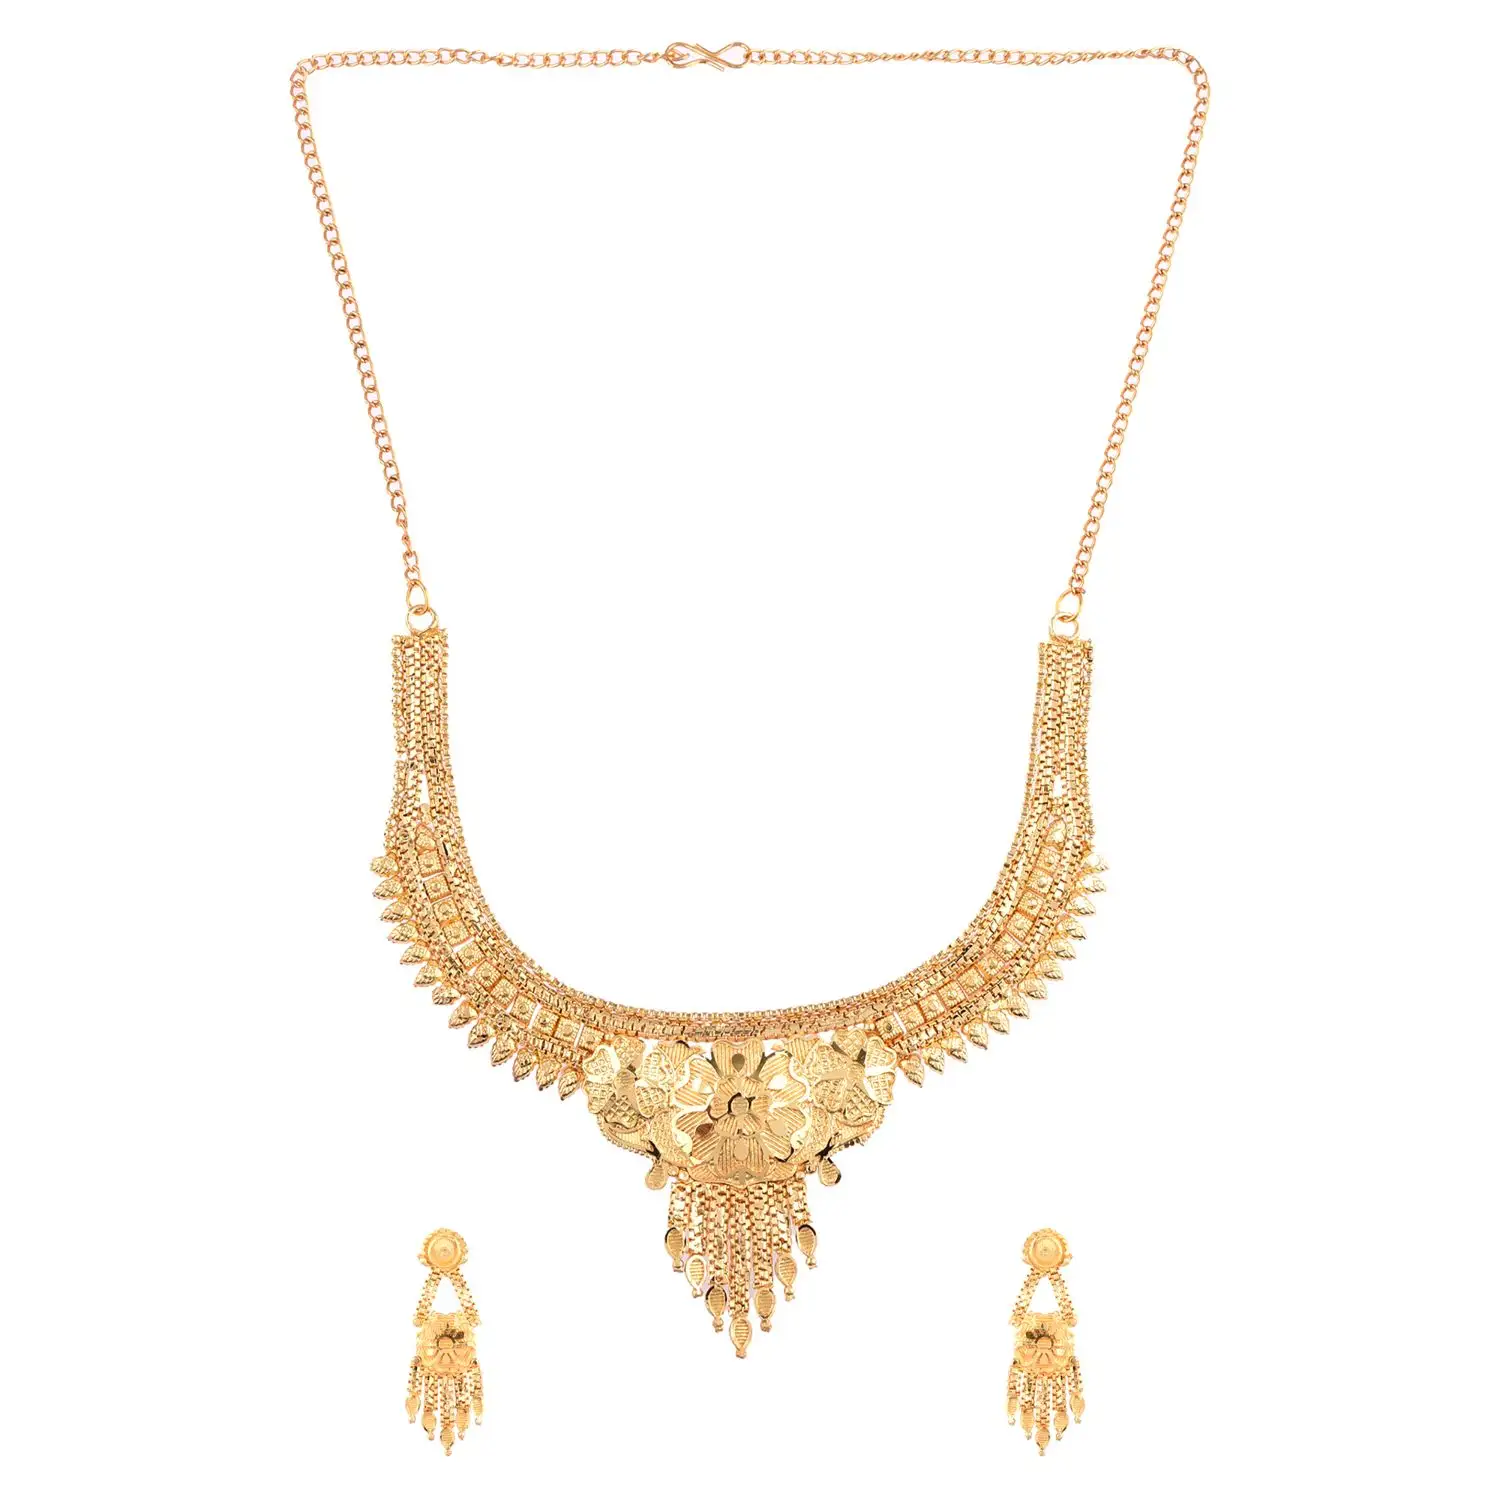 Indian Jewellery Bollywood Gold Plated Choker Necklace Earrings Jewellery Set for Women Girls